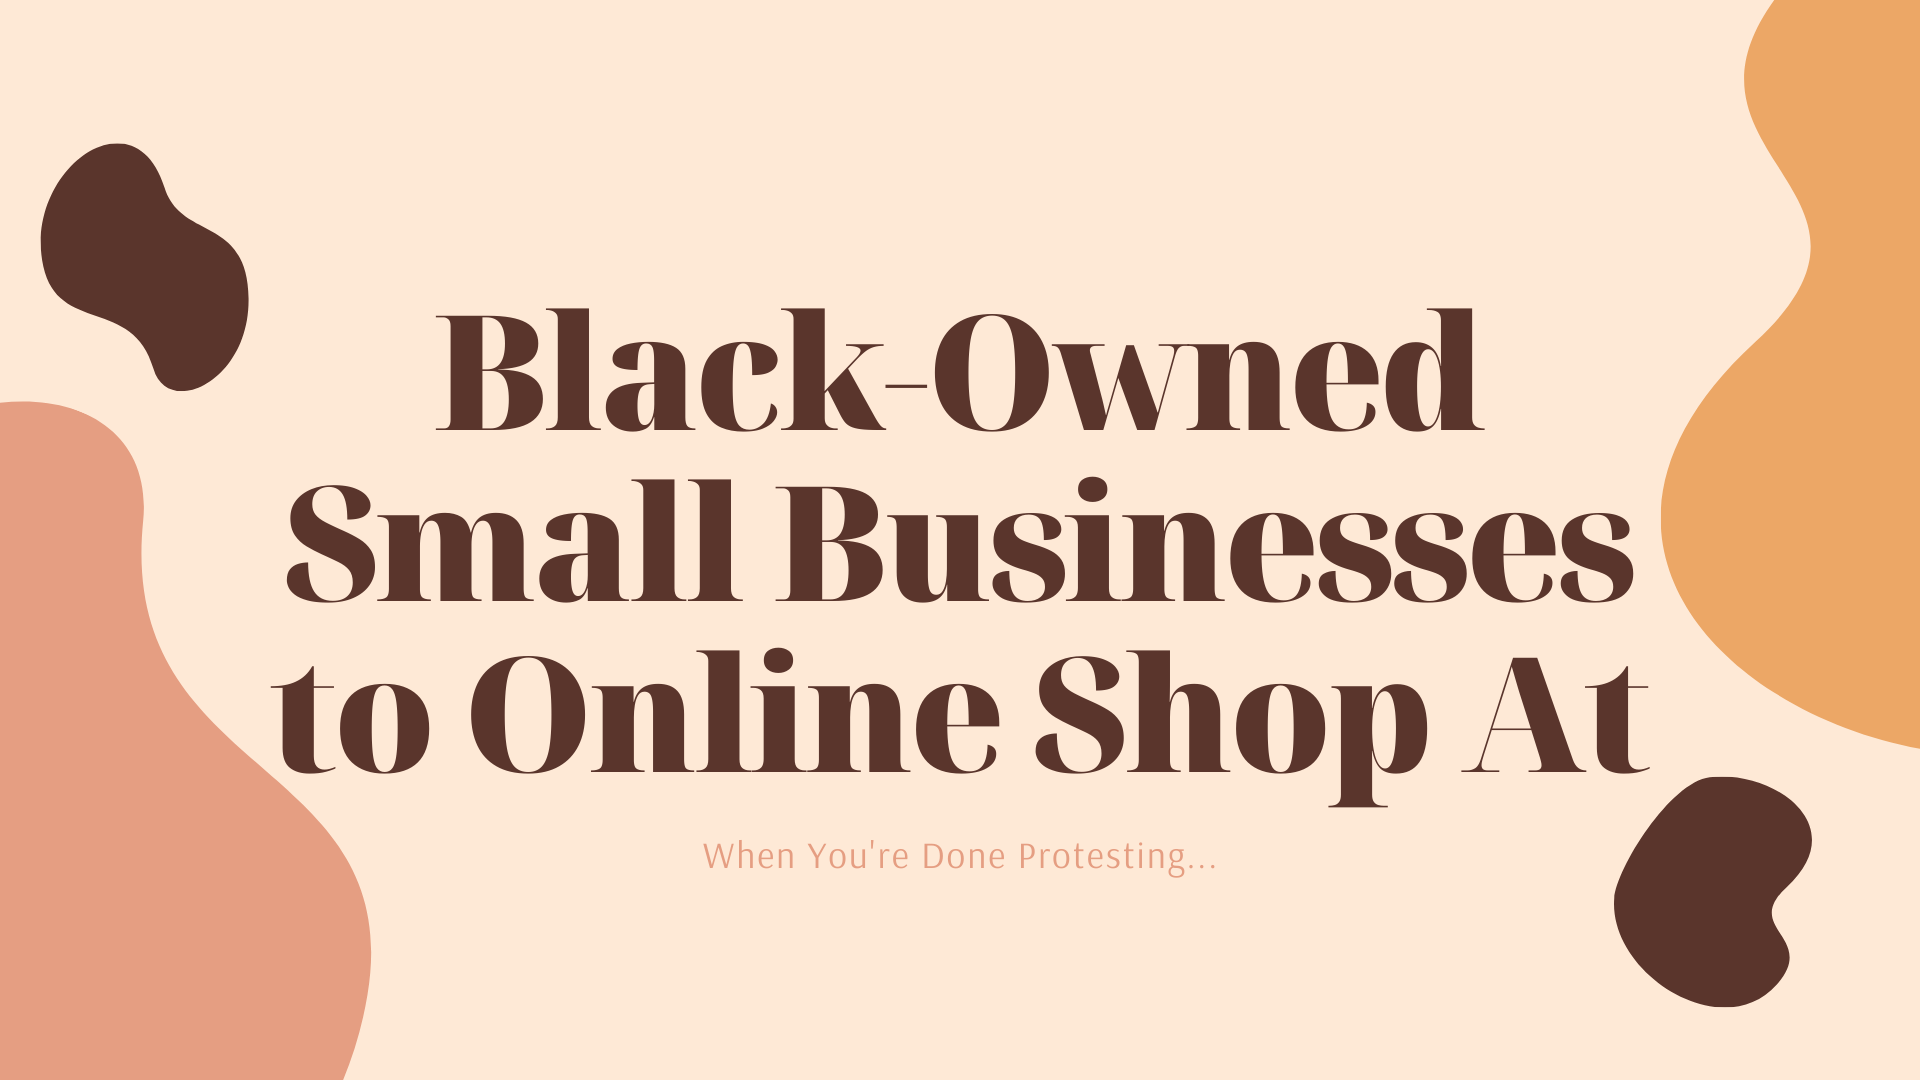 Text that reads, "Black-Owned Small Businesses to Online Shop At. When You're Done Protesting..."